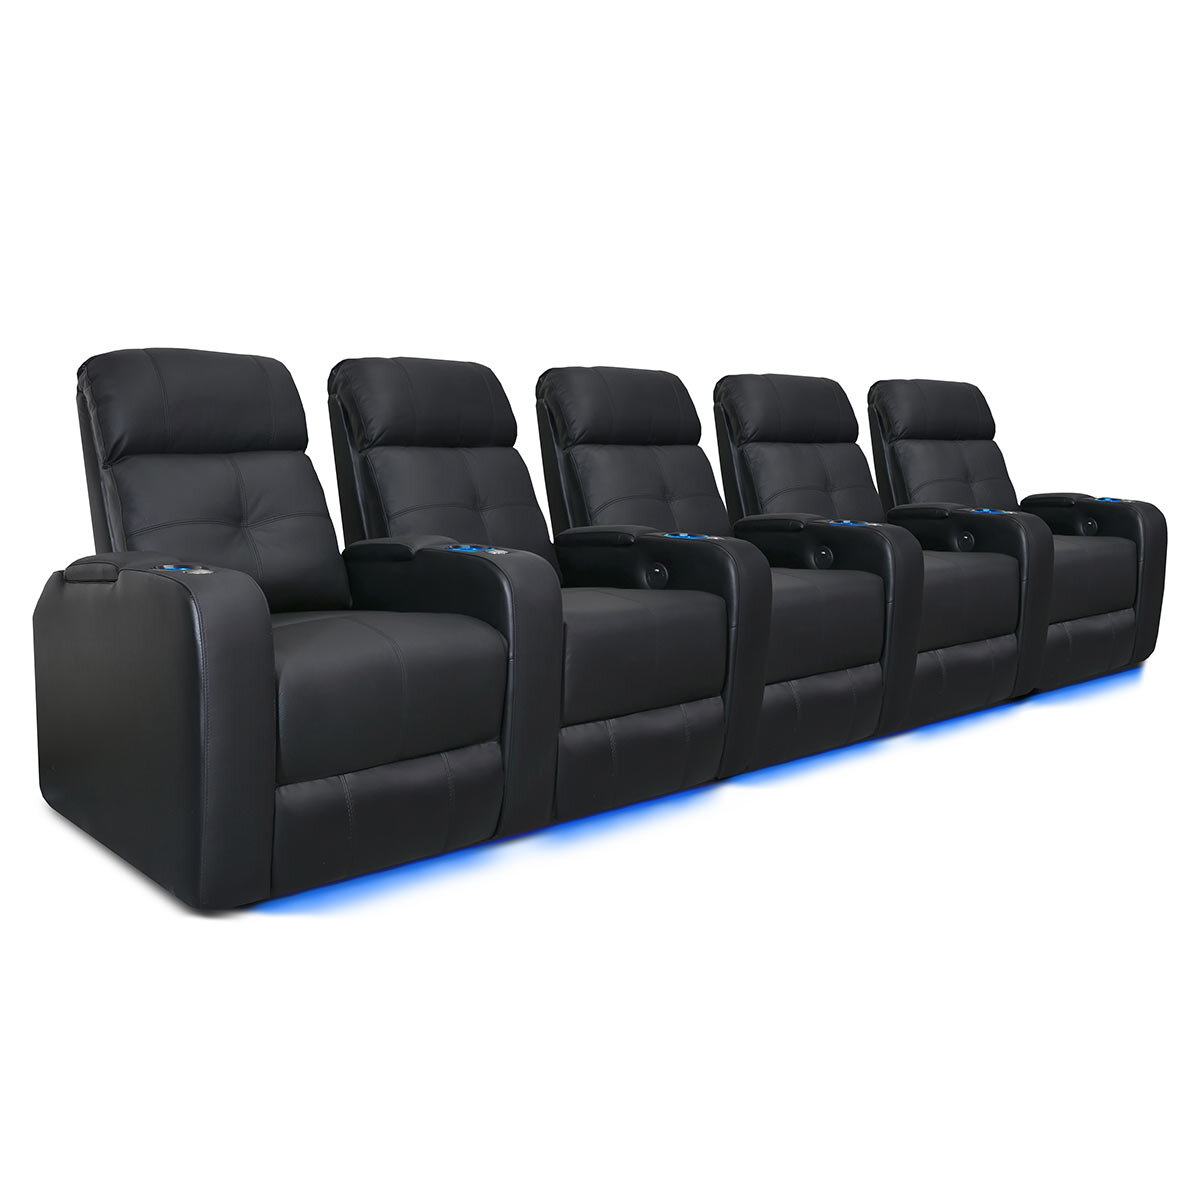 Valencia Home Theatre Seating Verona Row of 5 Chairs, Black